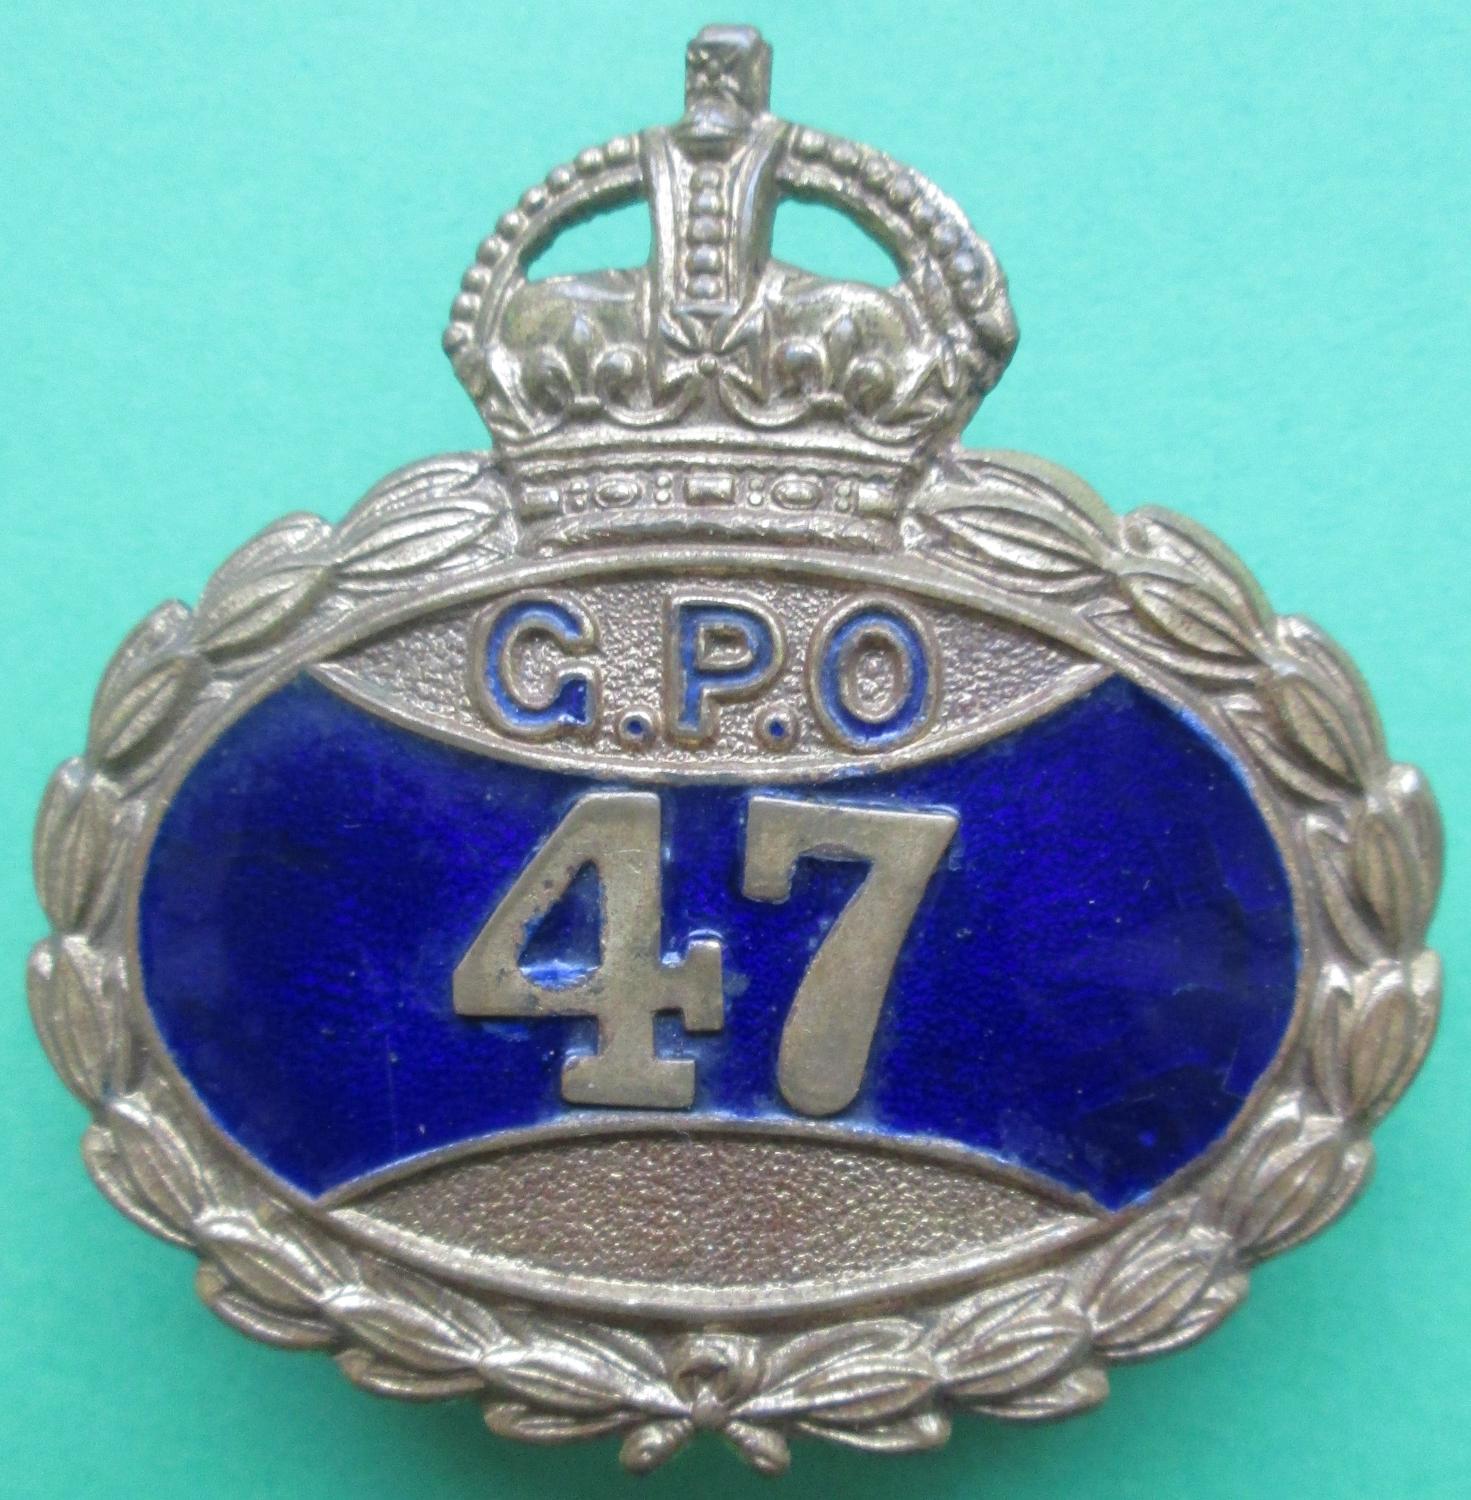 A PRE 1952 G.P.O BADGE WITH KING'S CROWN